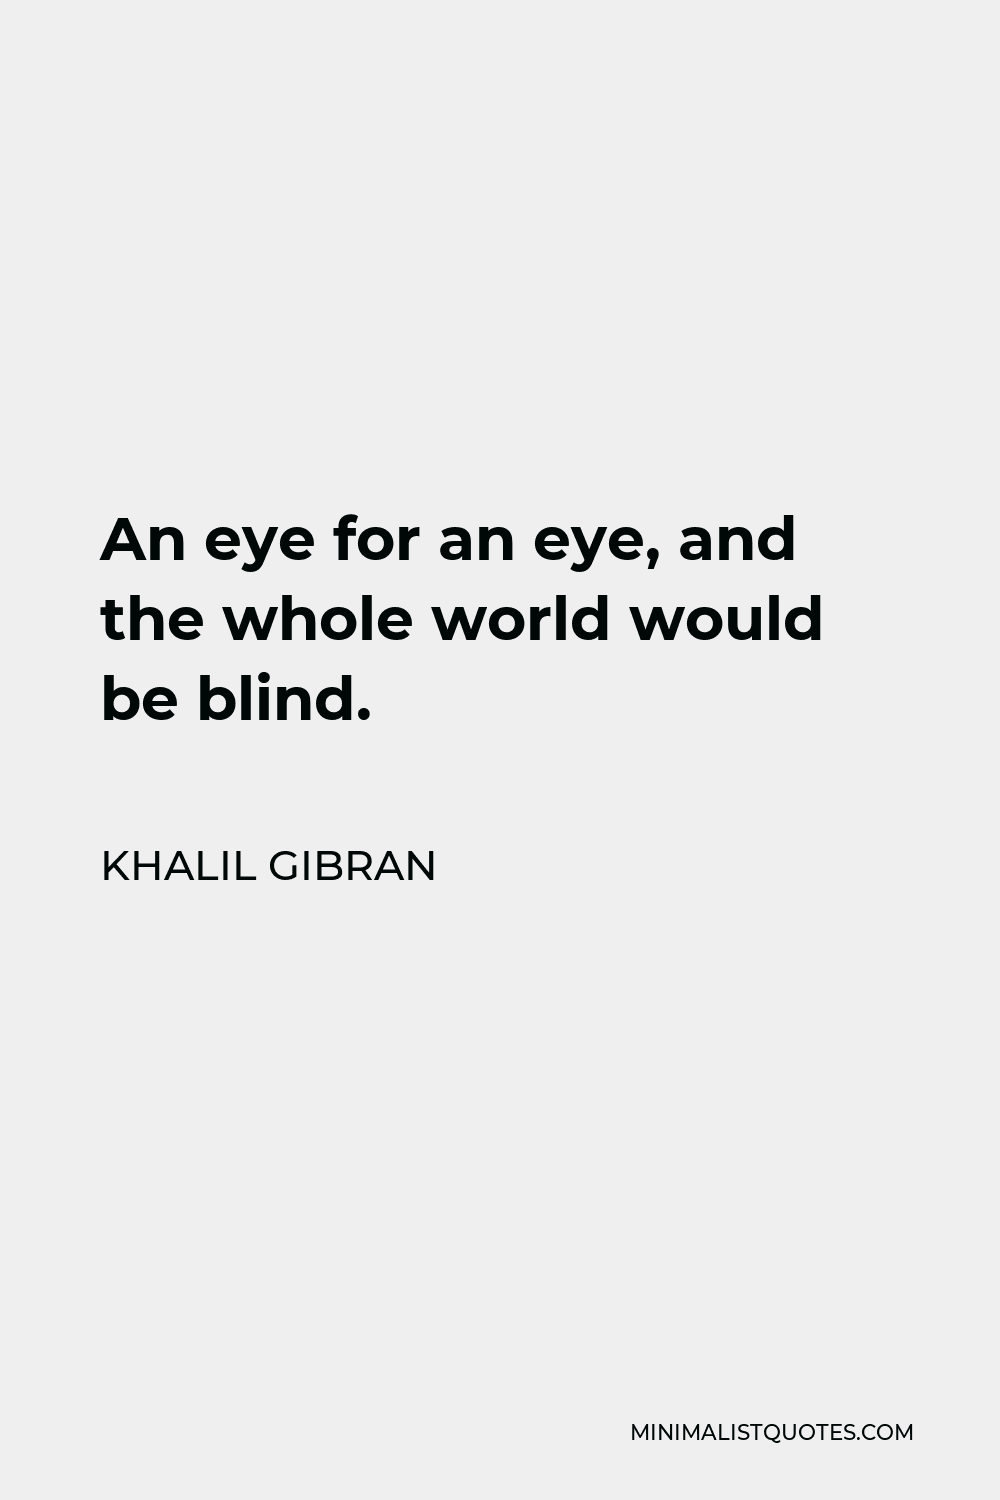 Khalil Gibran Quote - An eye for an eye, and the whole world would be blind.